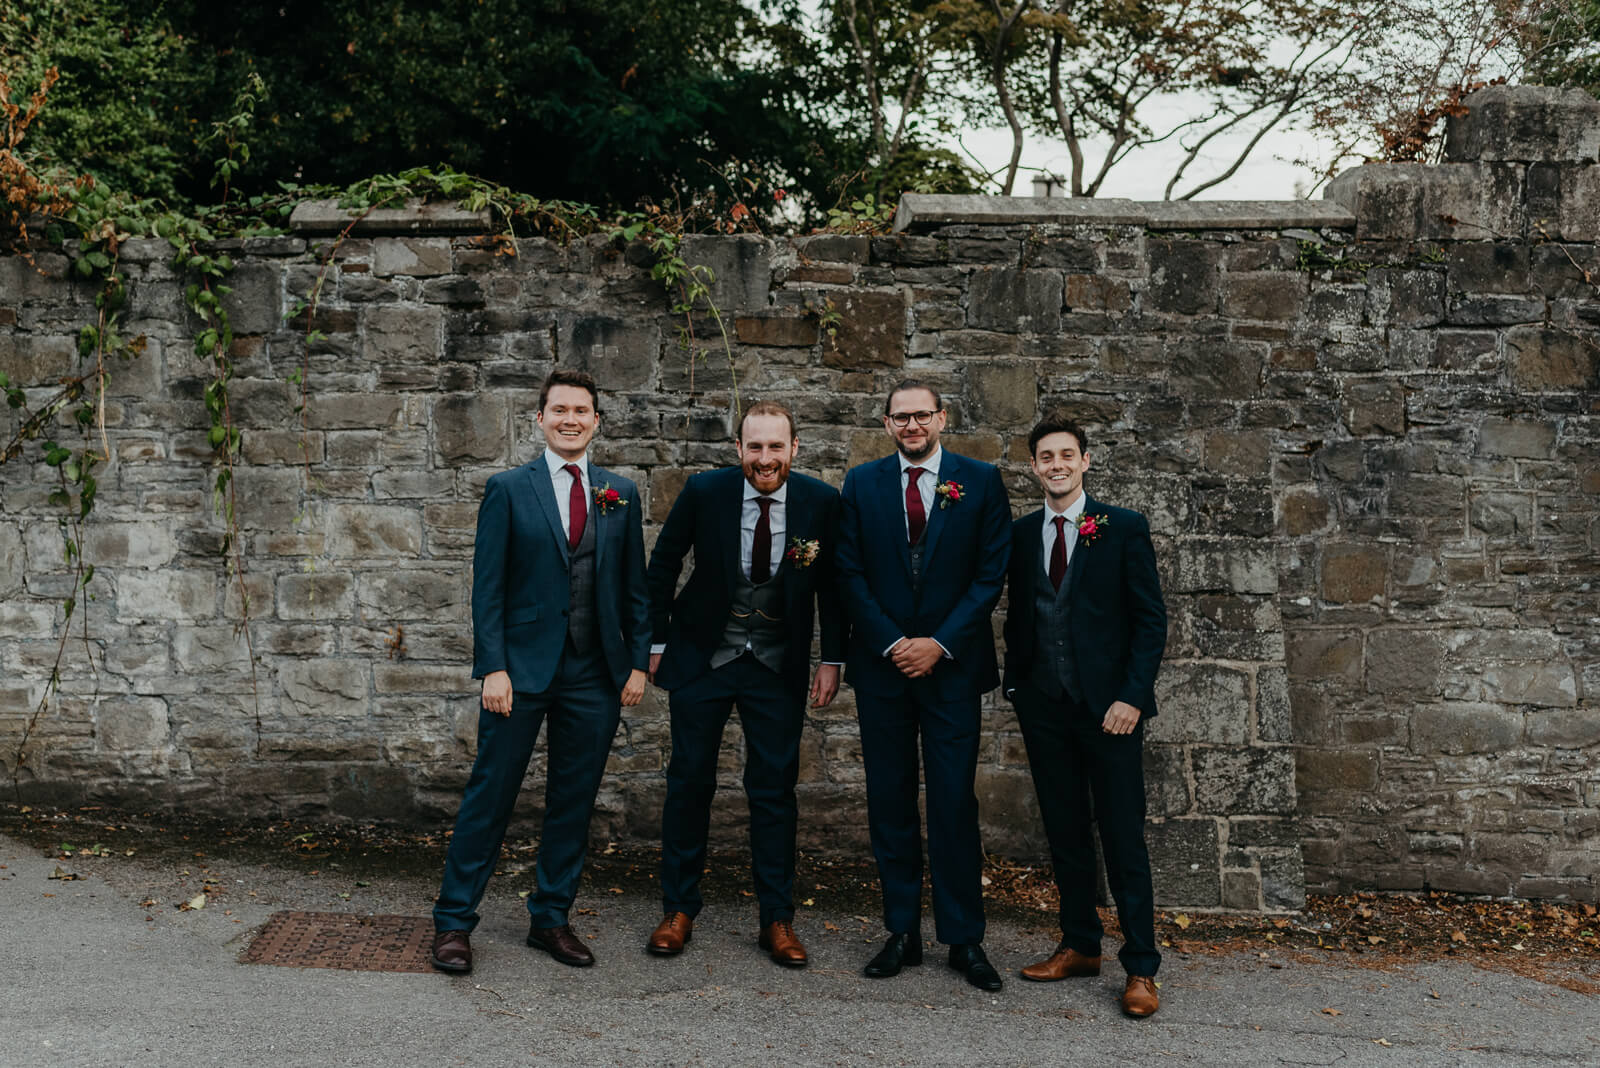 Groomsmen group photo at Insole Court in Cardiff